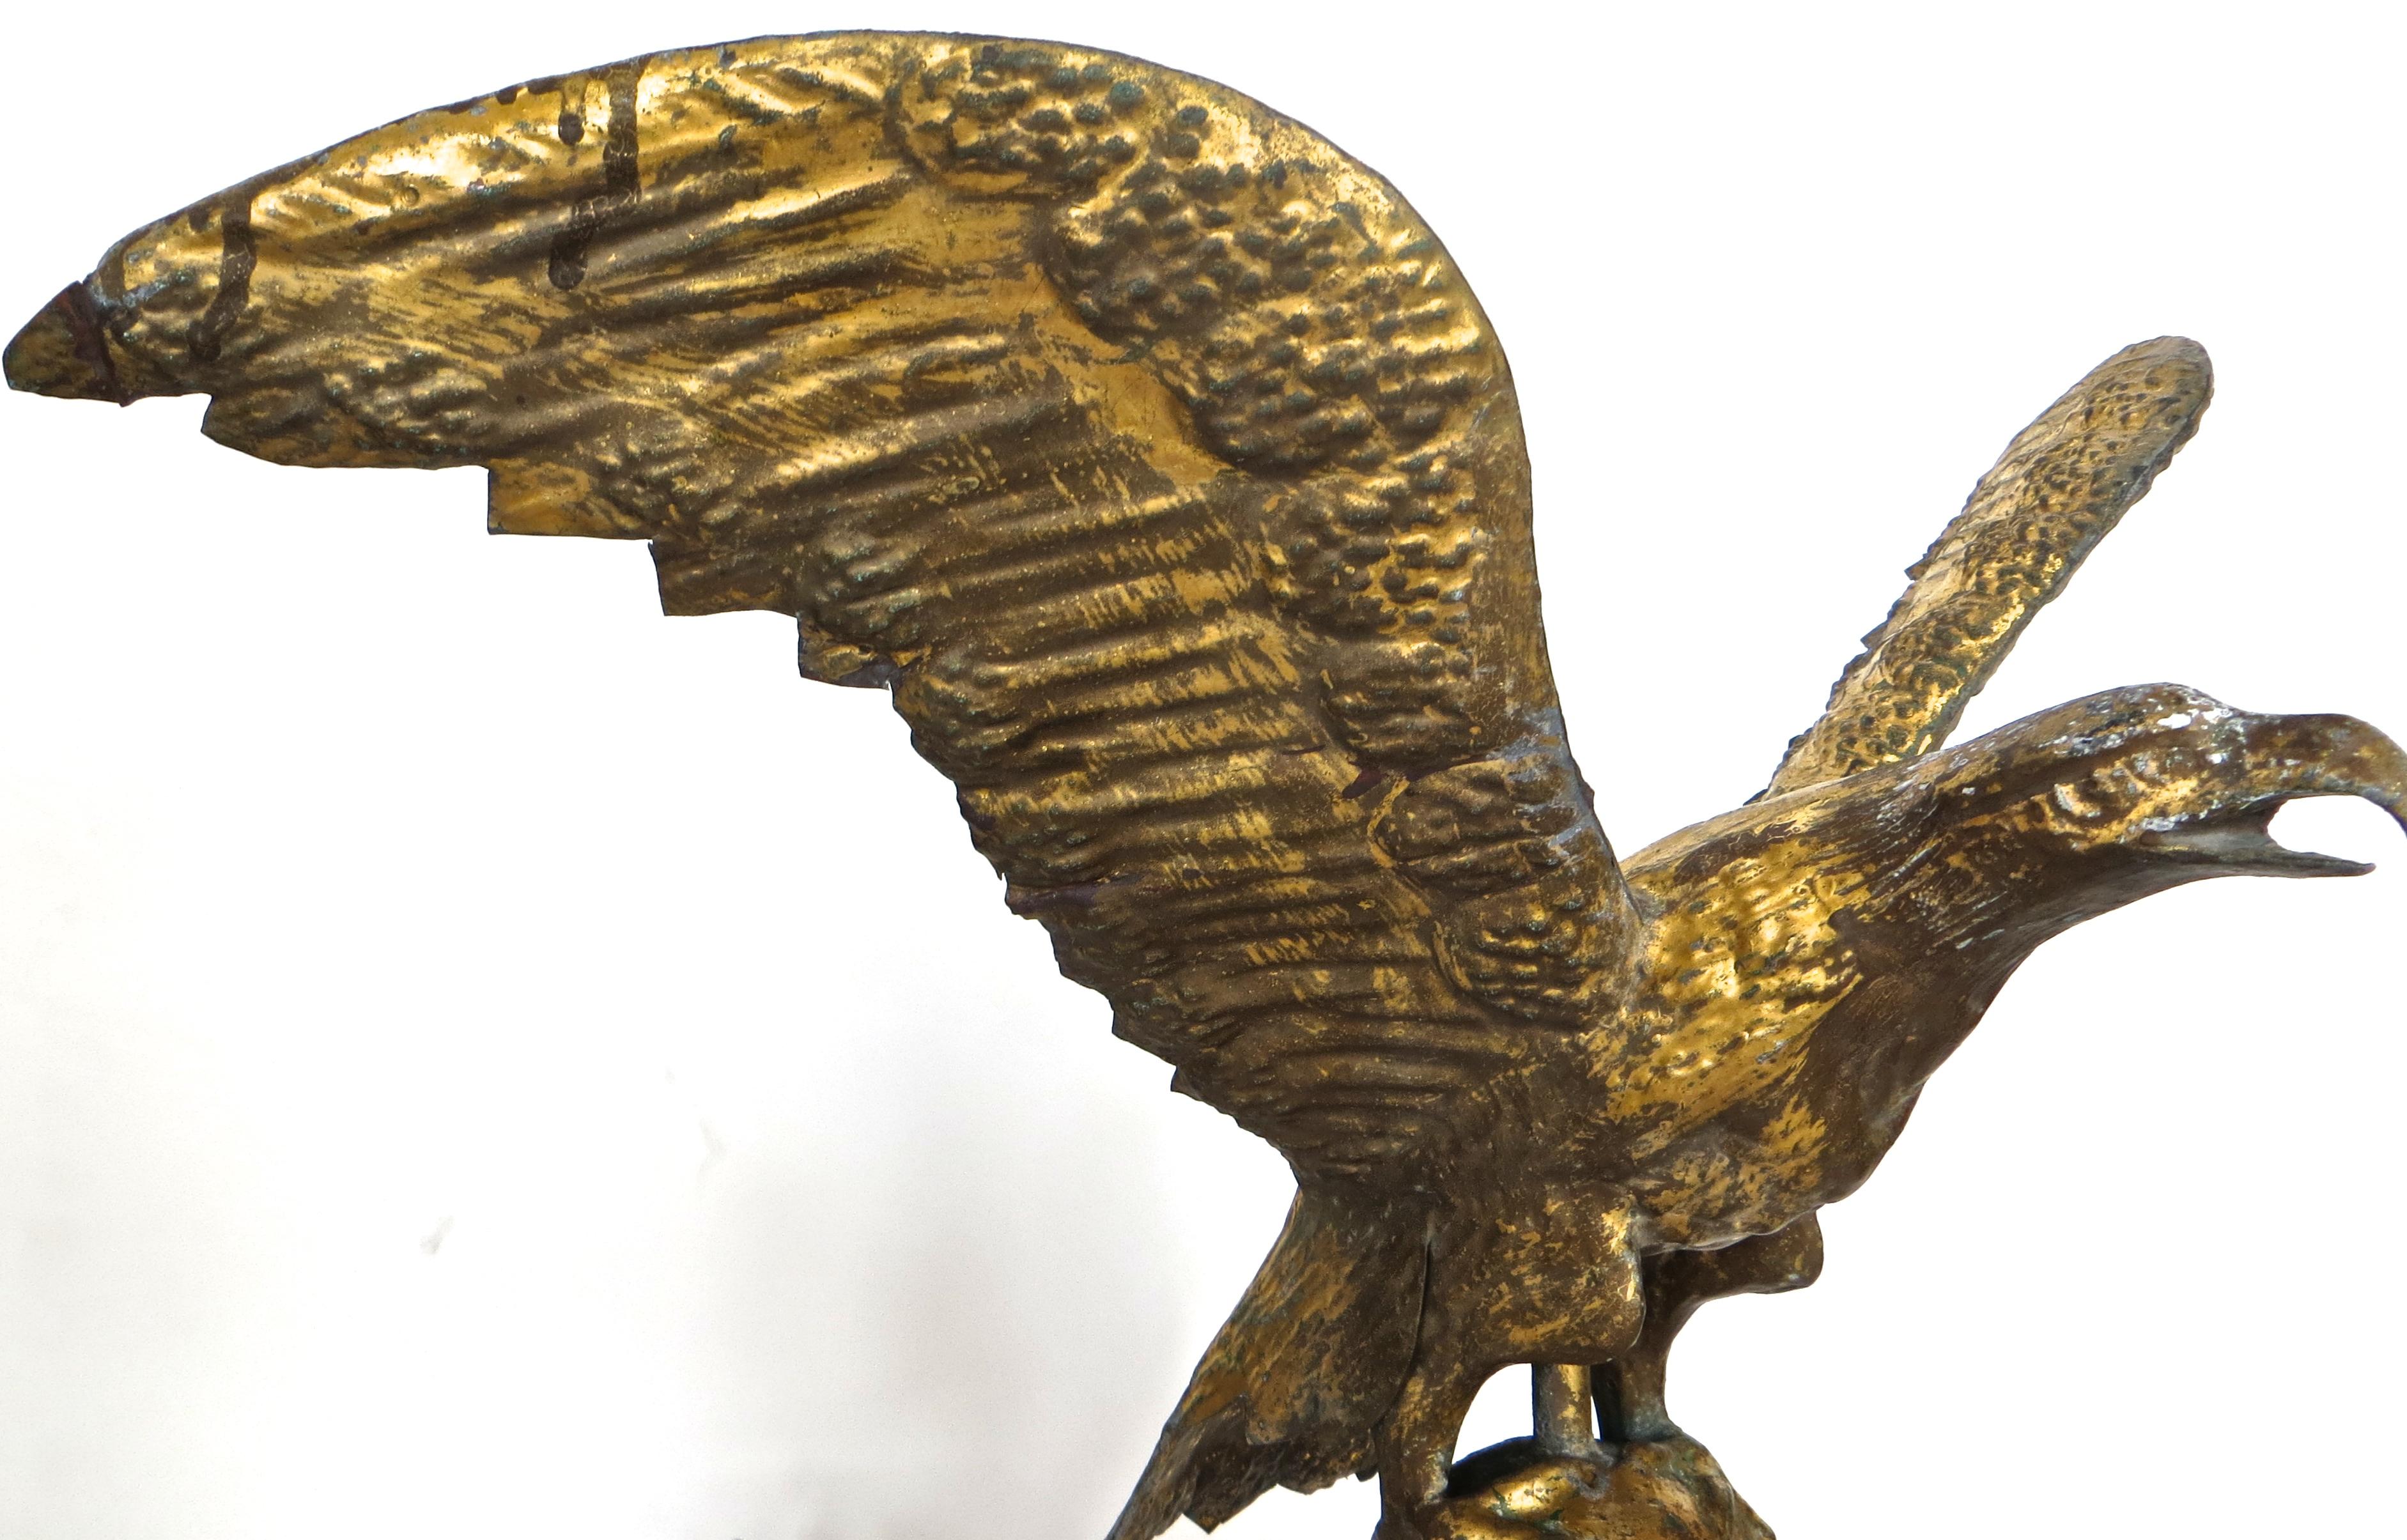 Outstanding example of a turn of the century gilded copper weathervane of an eagle with outstretched wings, sitting atop a ball; more than likely manufactured by the Puritan Ironworks Company of Boston, Massachusetts, noted for fine quality goods.